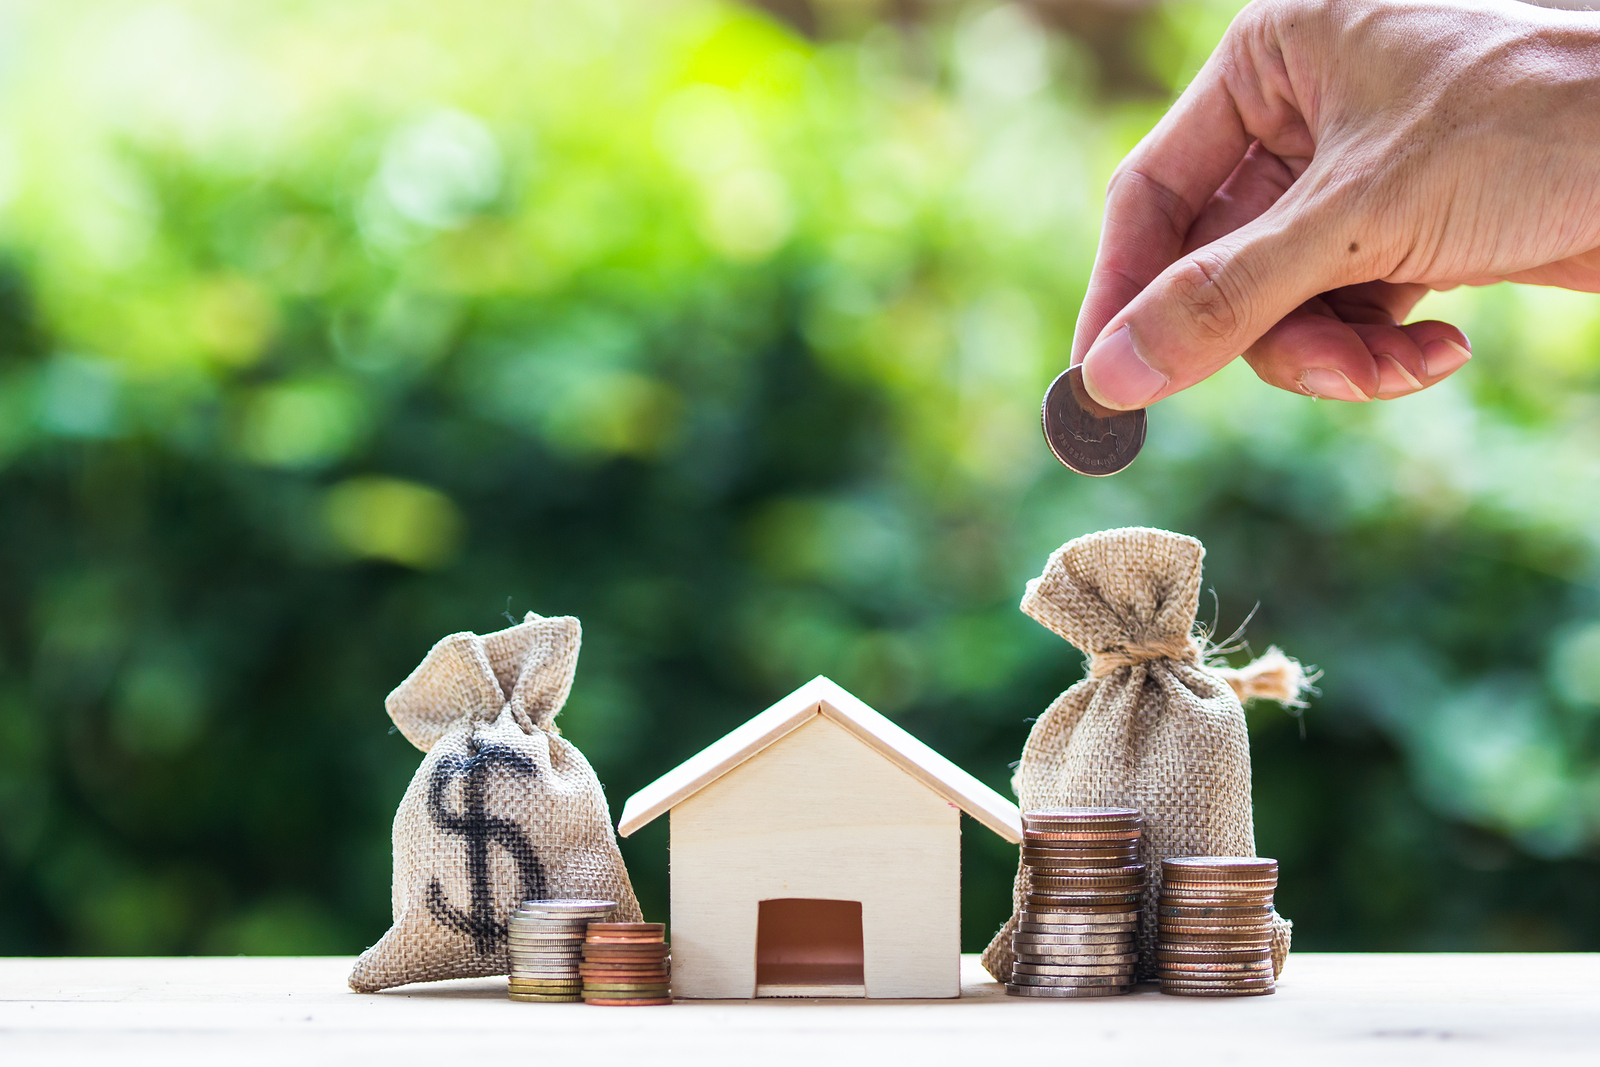 putting money into investment properties with family. 